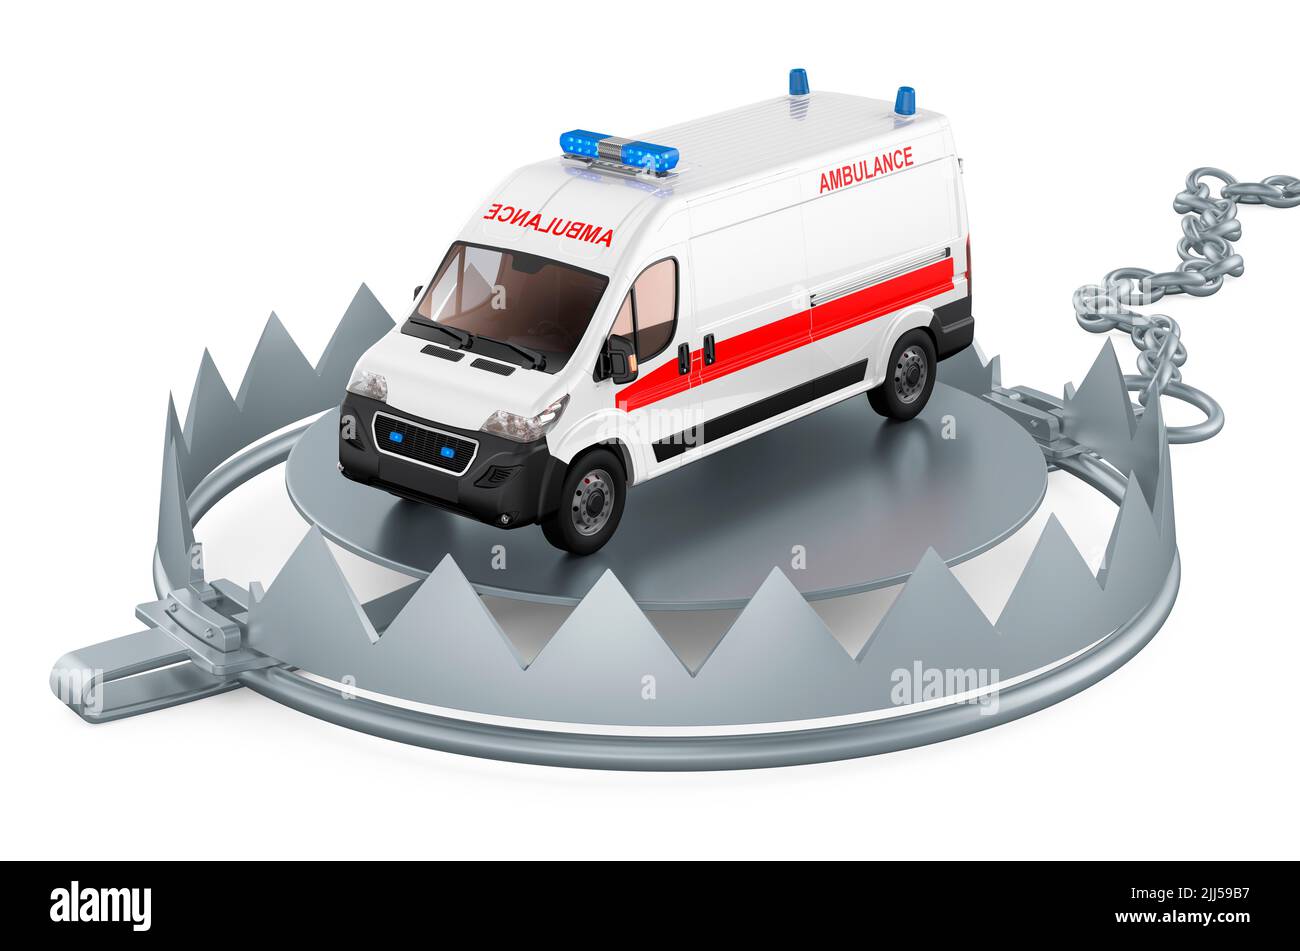 Bear trap with ambulance van. 3D rendering isolated on white background Stock Photo